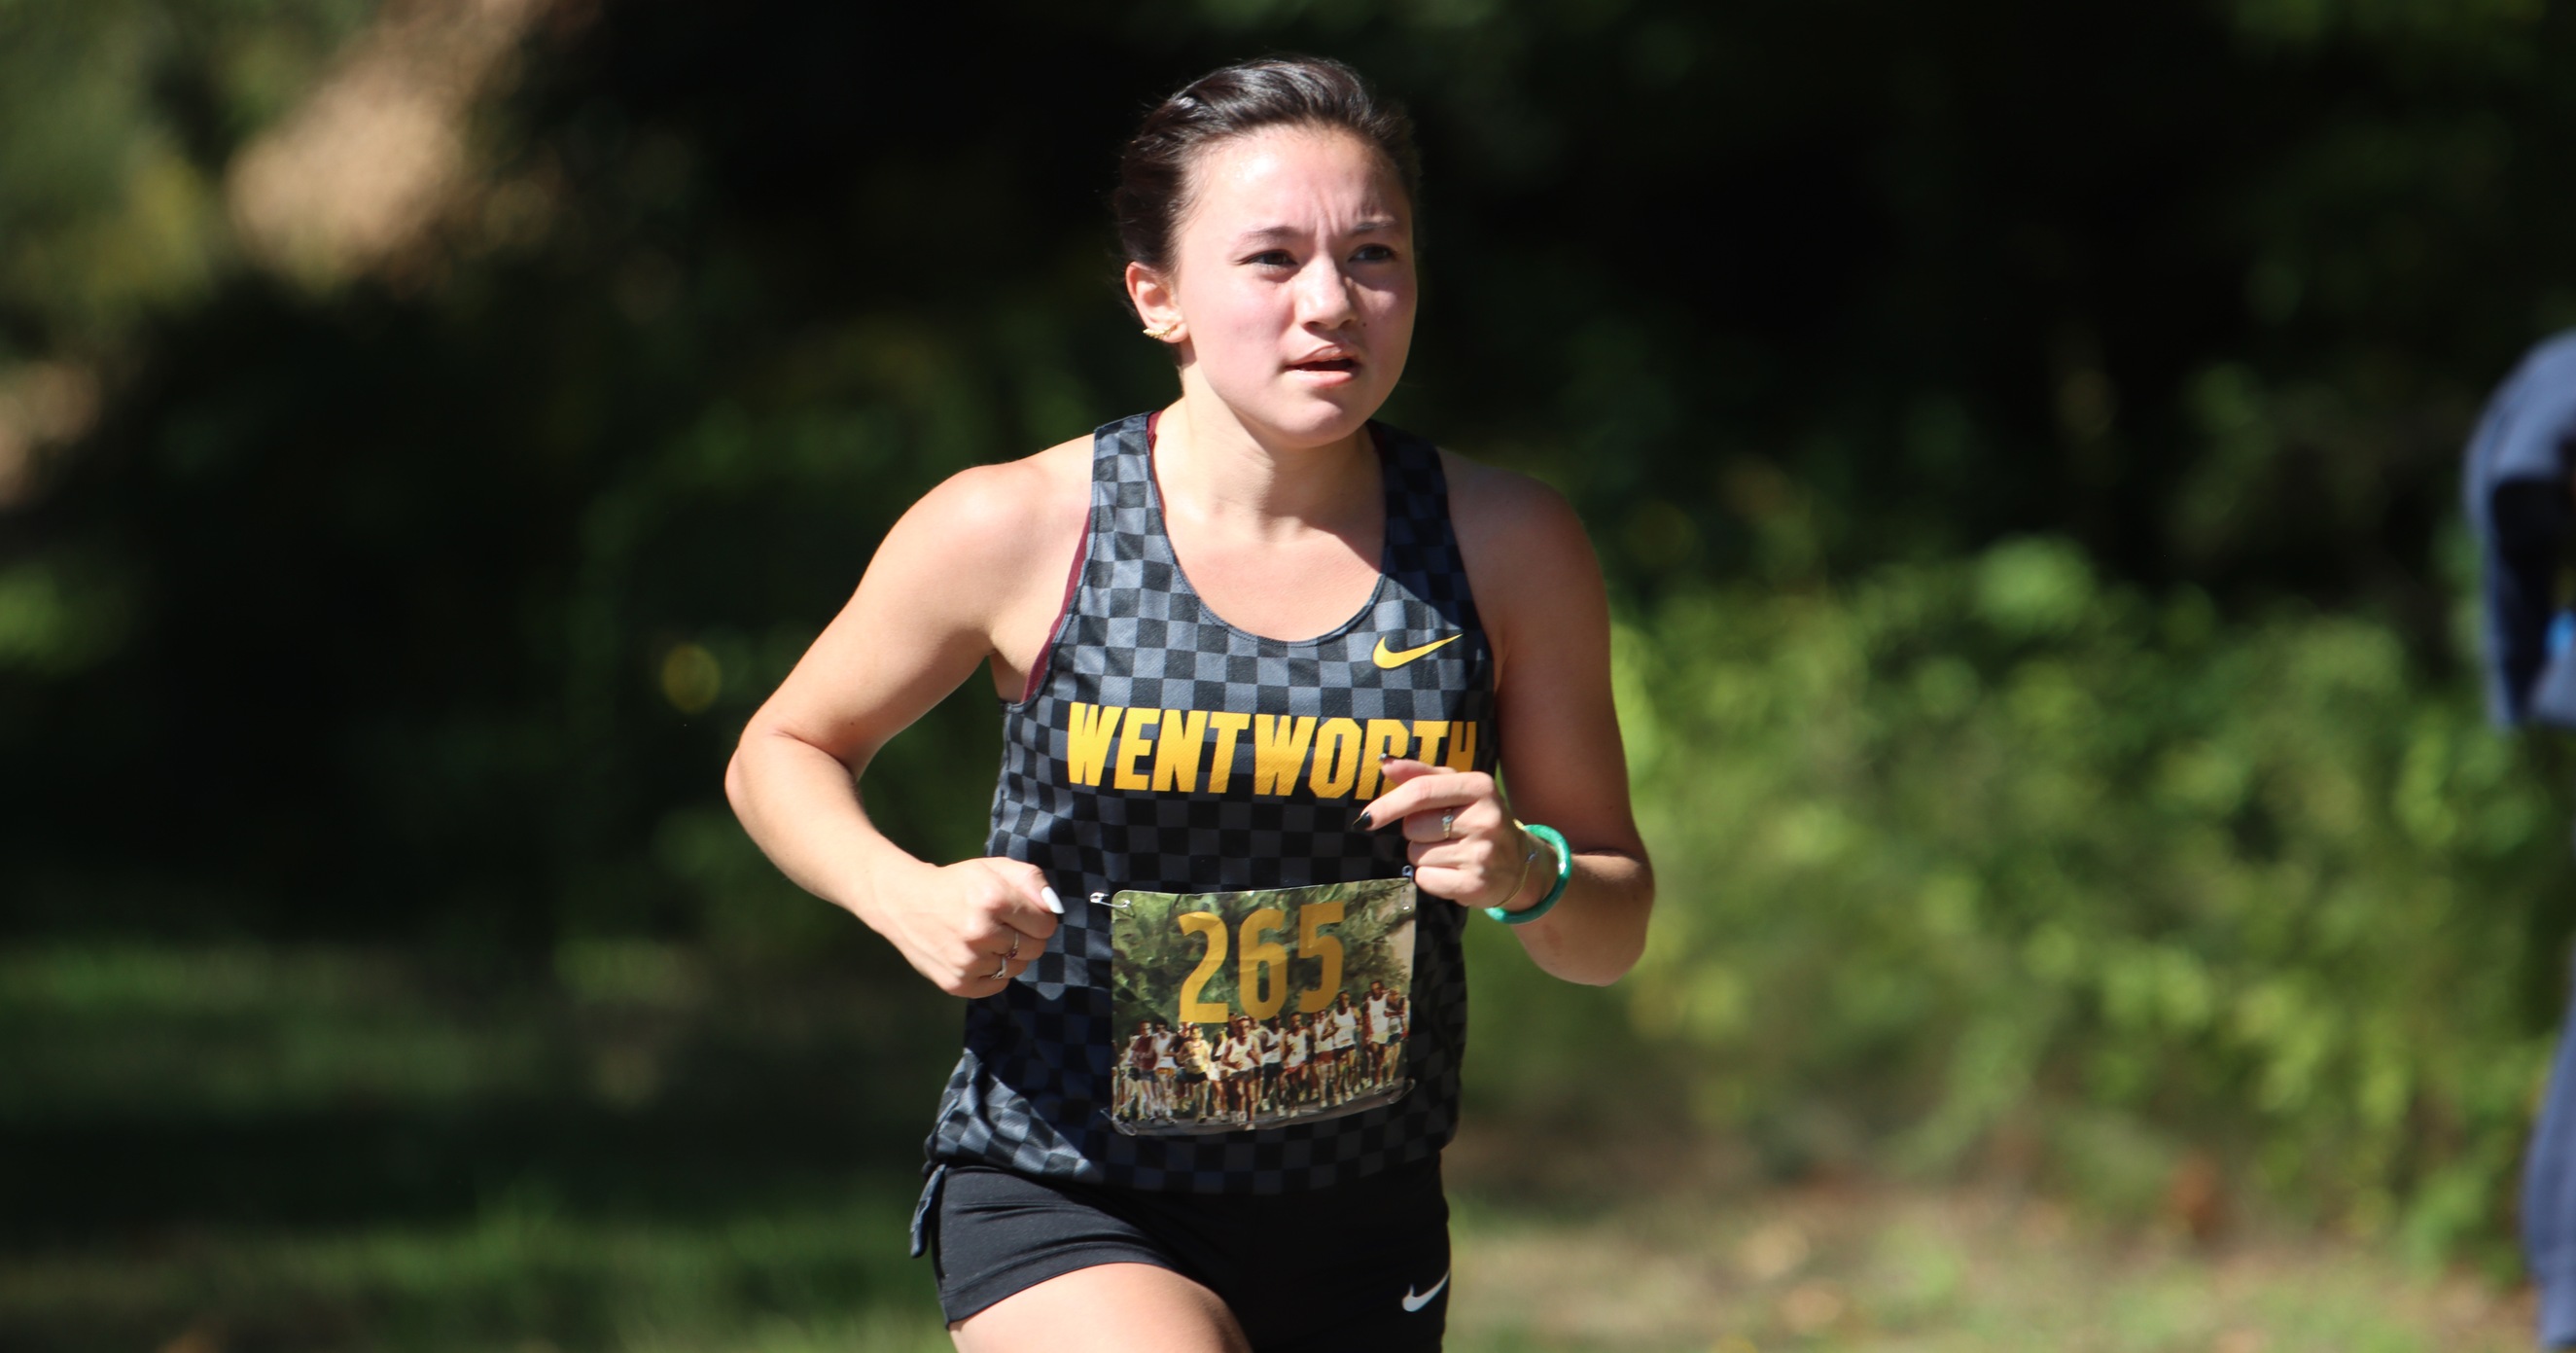 Chu Paces Women's Cross Country at James Earley Invitational